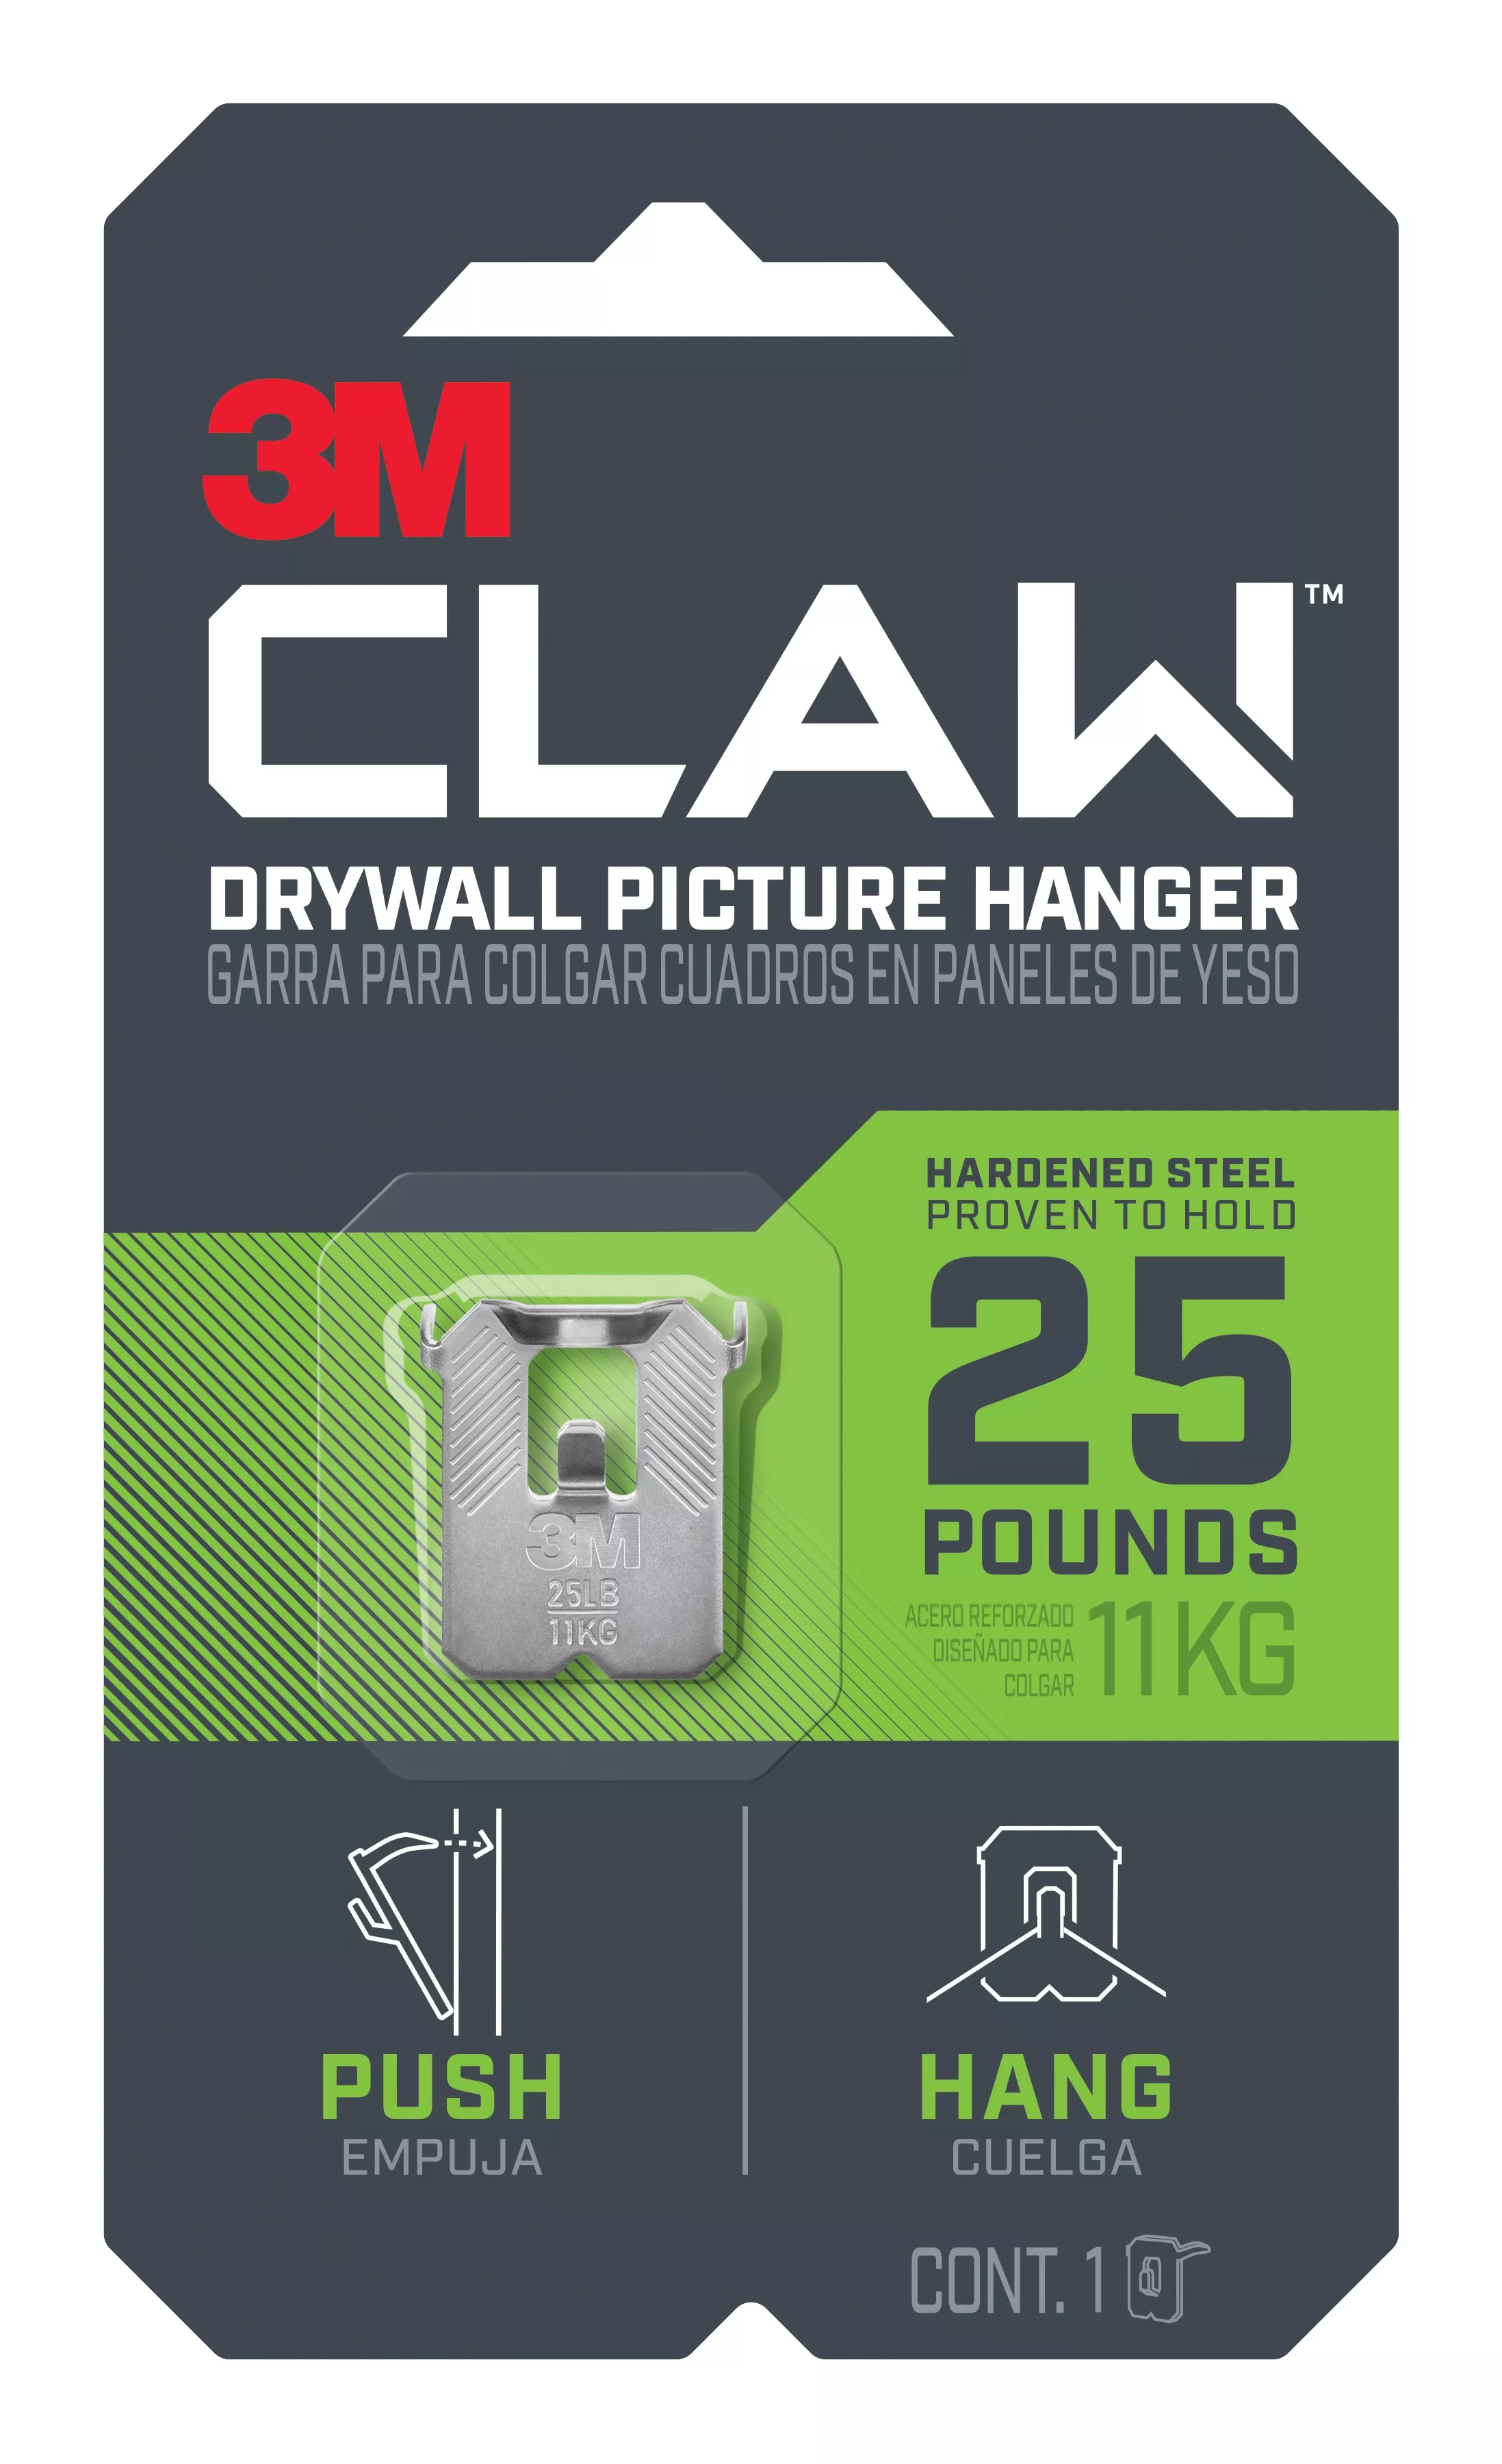 SKU 7100227276 | 3M CLAW™ Drywall Picture Hanger 25 lb 3PH25-1EF